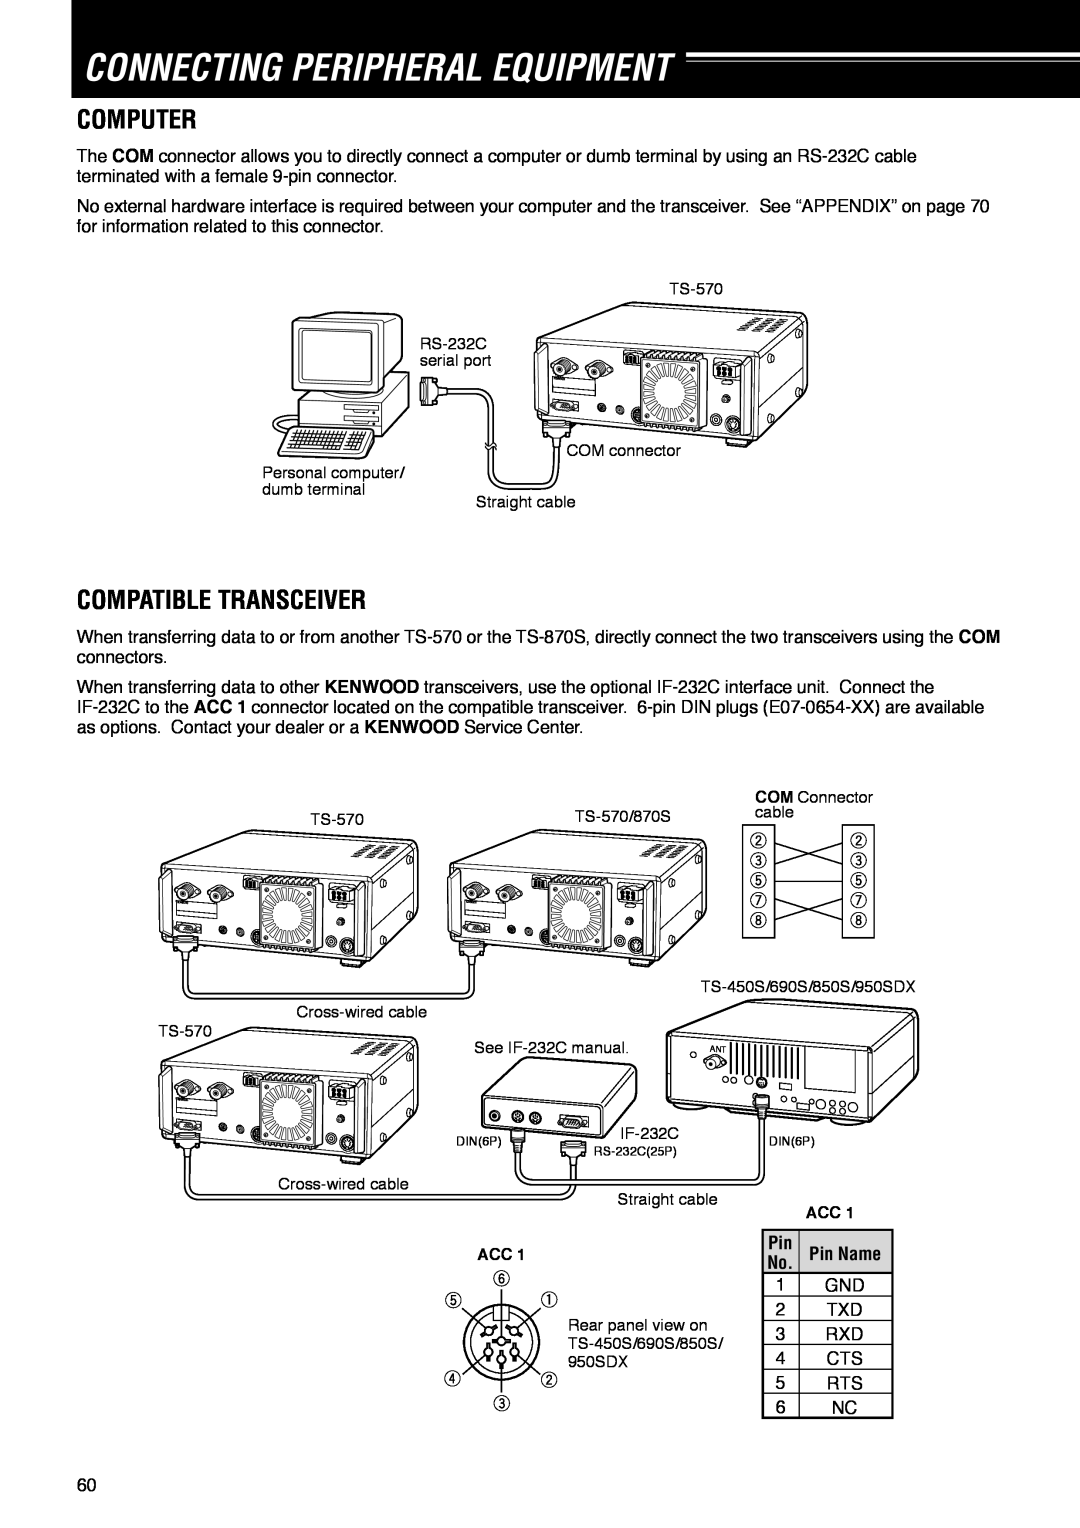 Kenwood TS-570D instruction manual Connecting Peripheral Equipment, Computer, Compatible Transceiver 